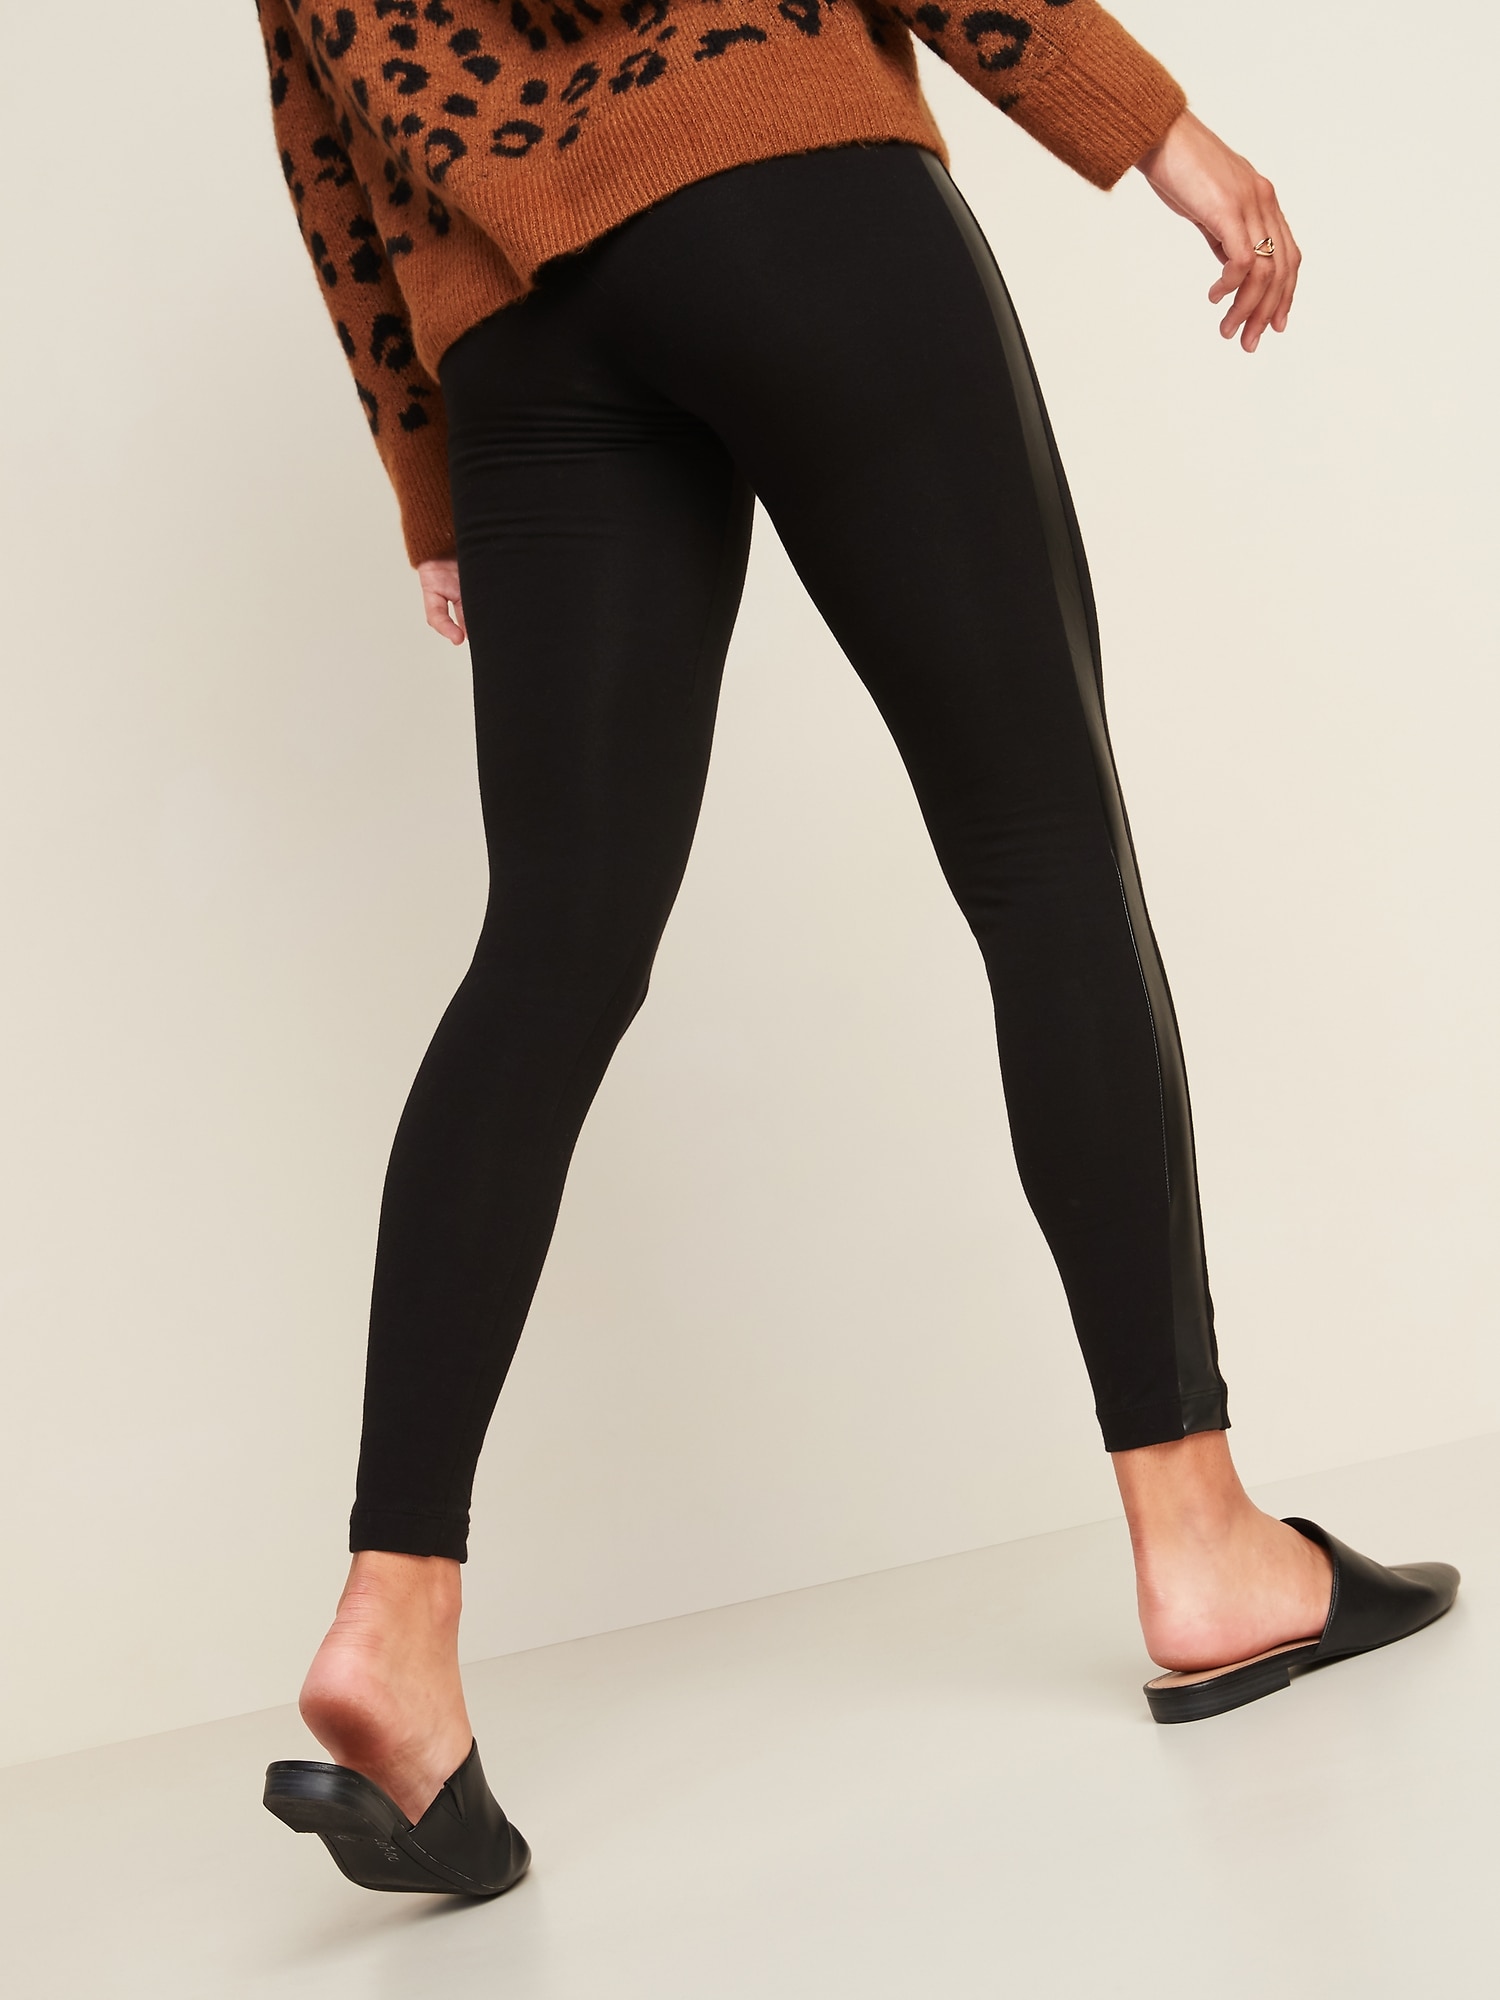 old navy faux leather pants